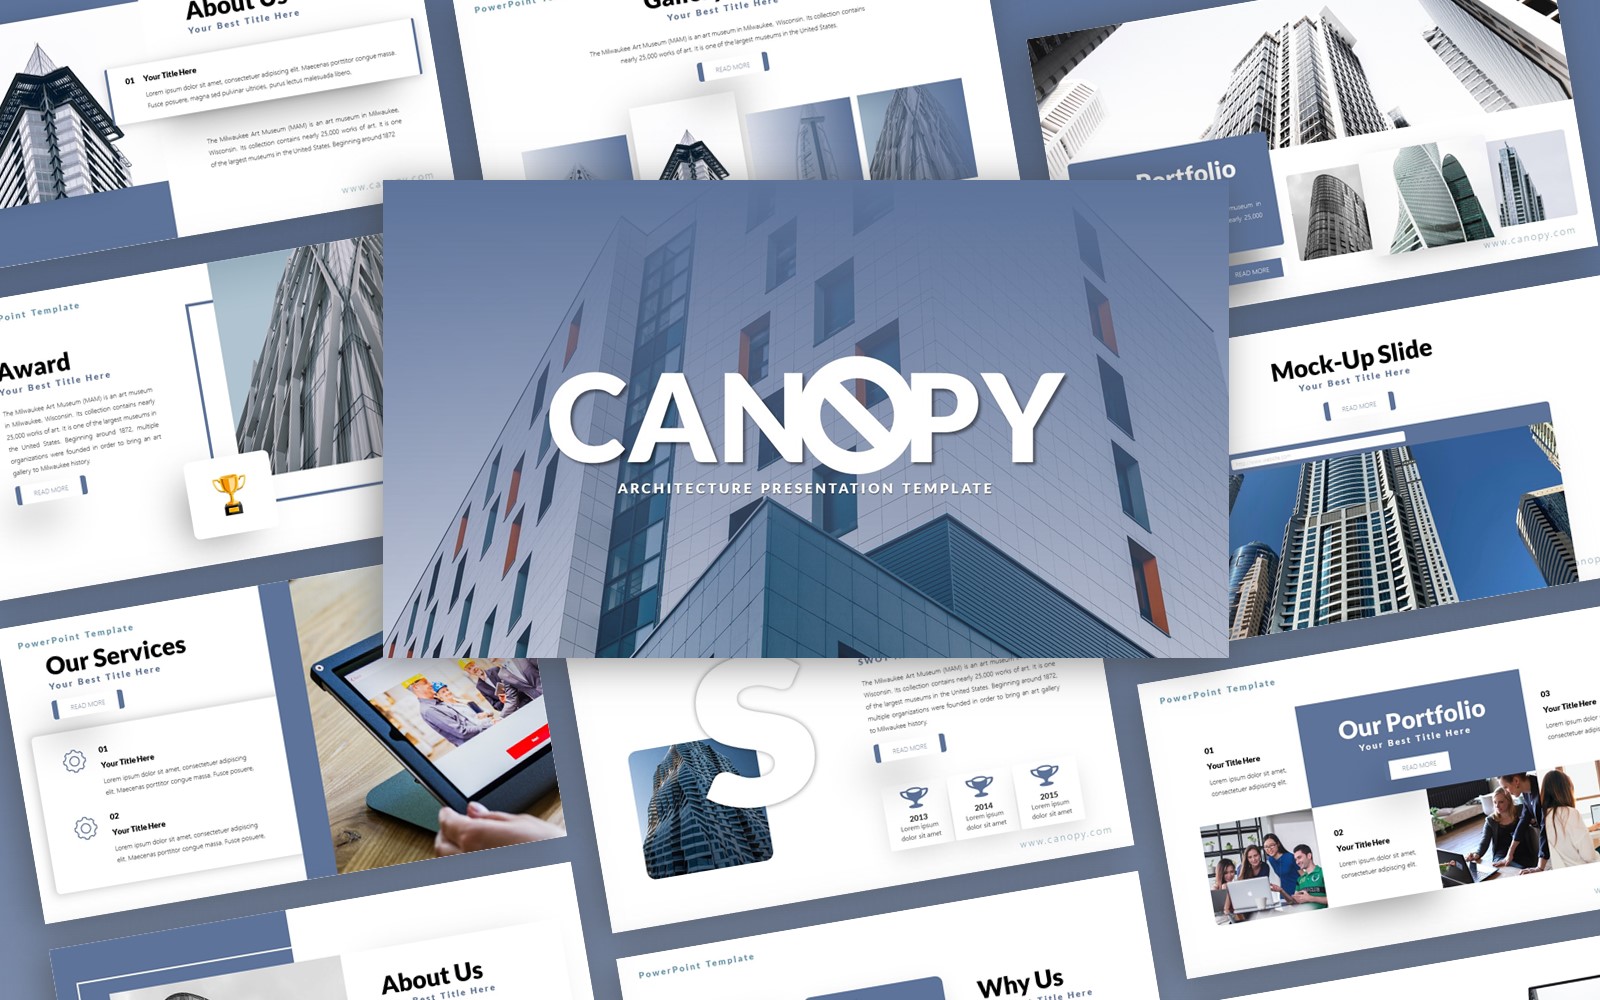 Canopy Architecture Presentation PowerPoint template